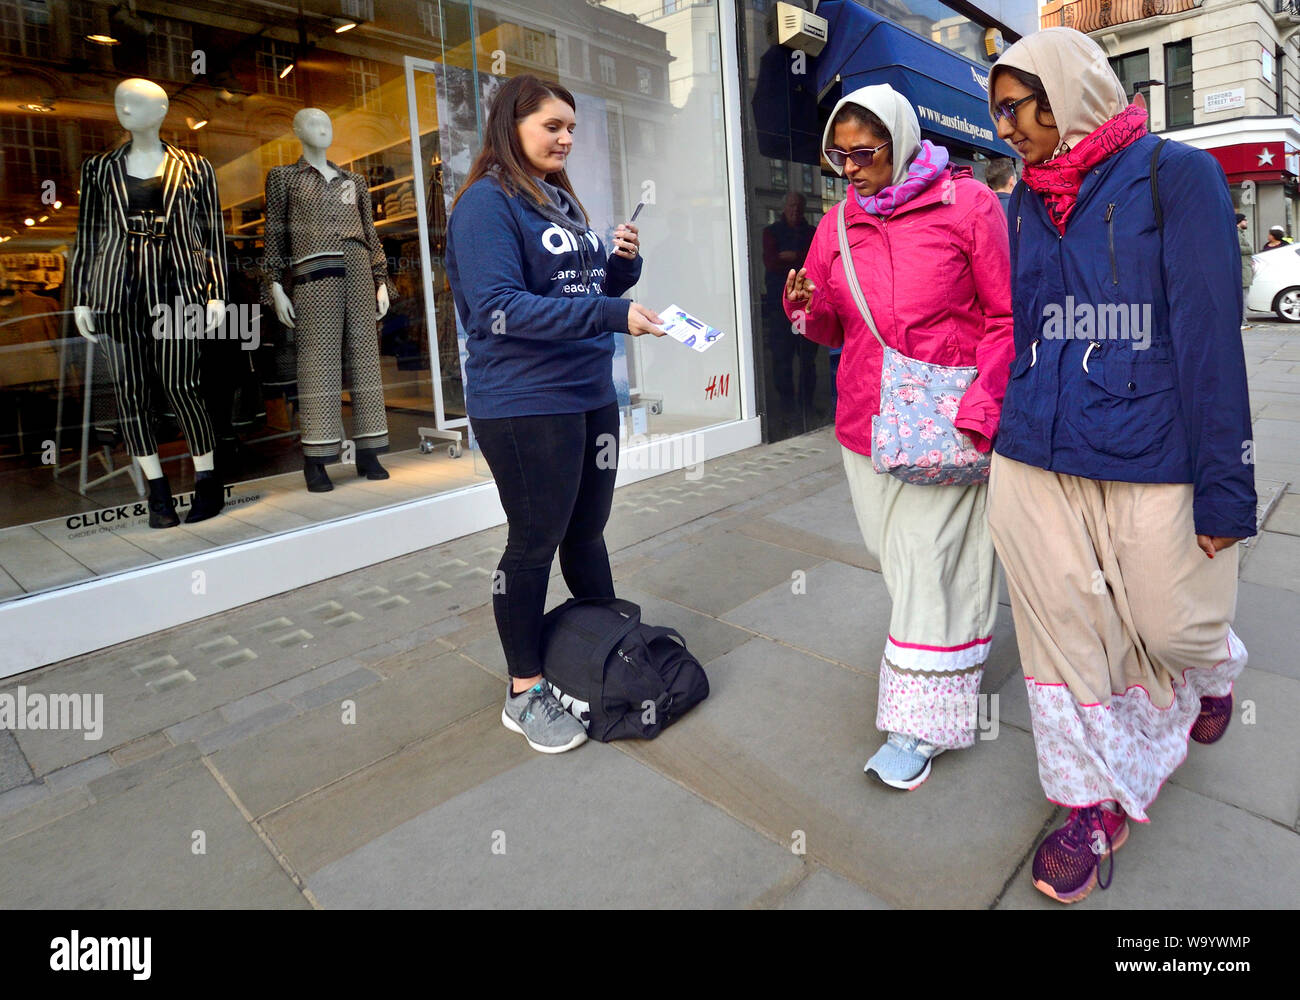 London, England, UK. Woman handing out leaflets in Oxford Street Stock Photo